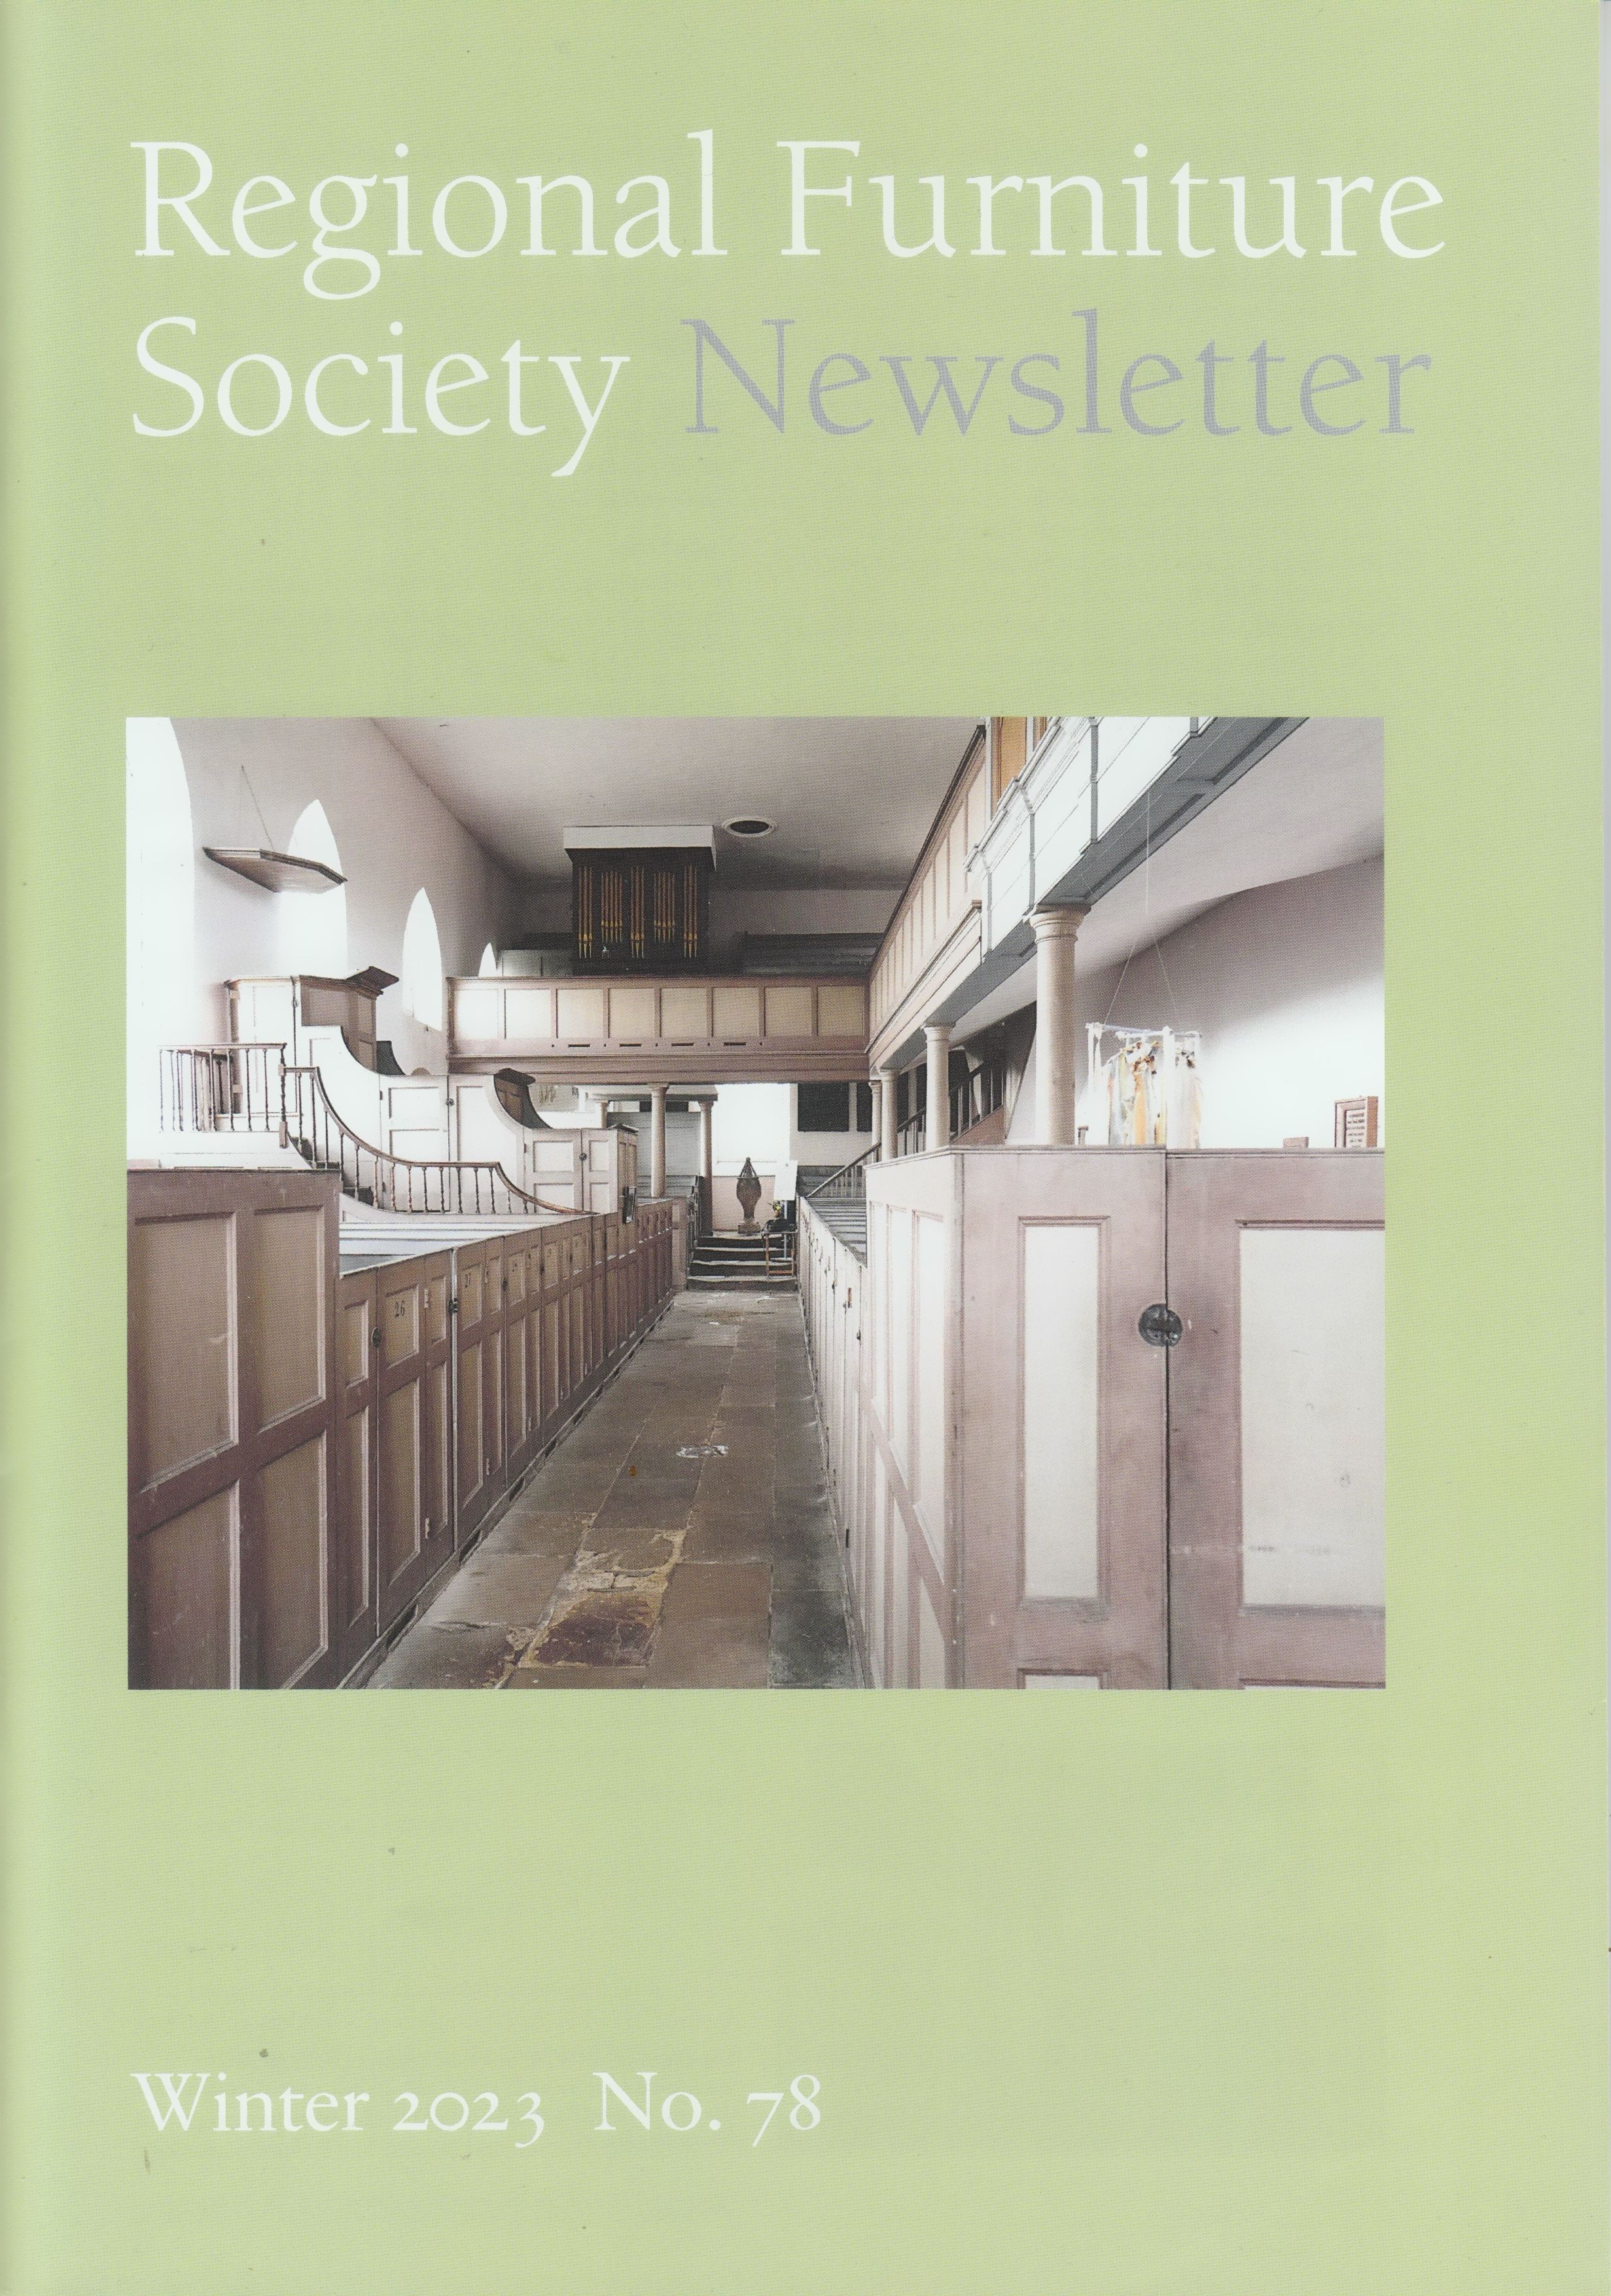 Newsletter Research Articles | Regional Furniture Society